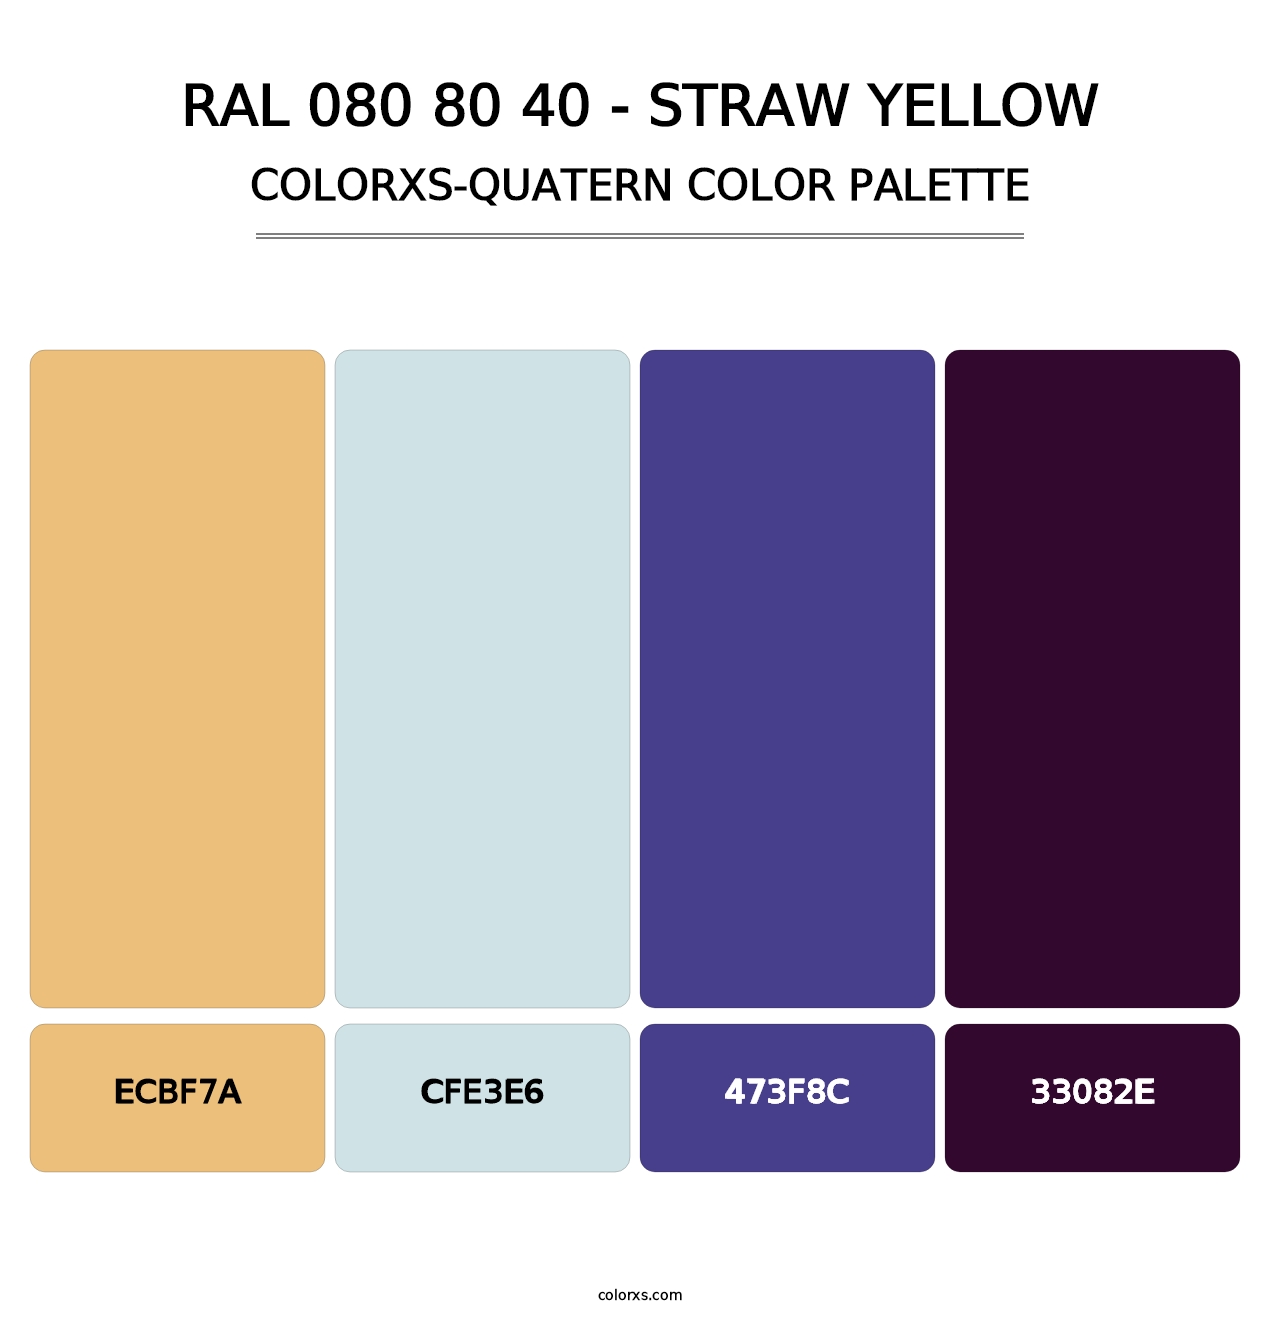 RAL 080 80 40 - Straw Yellow - Colorxs Quatern Palette